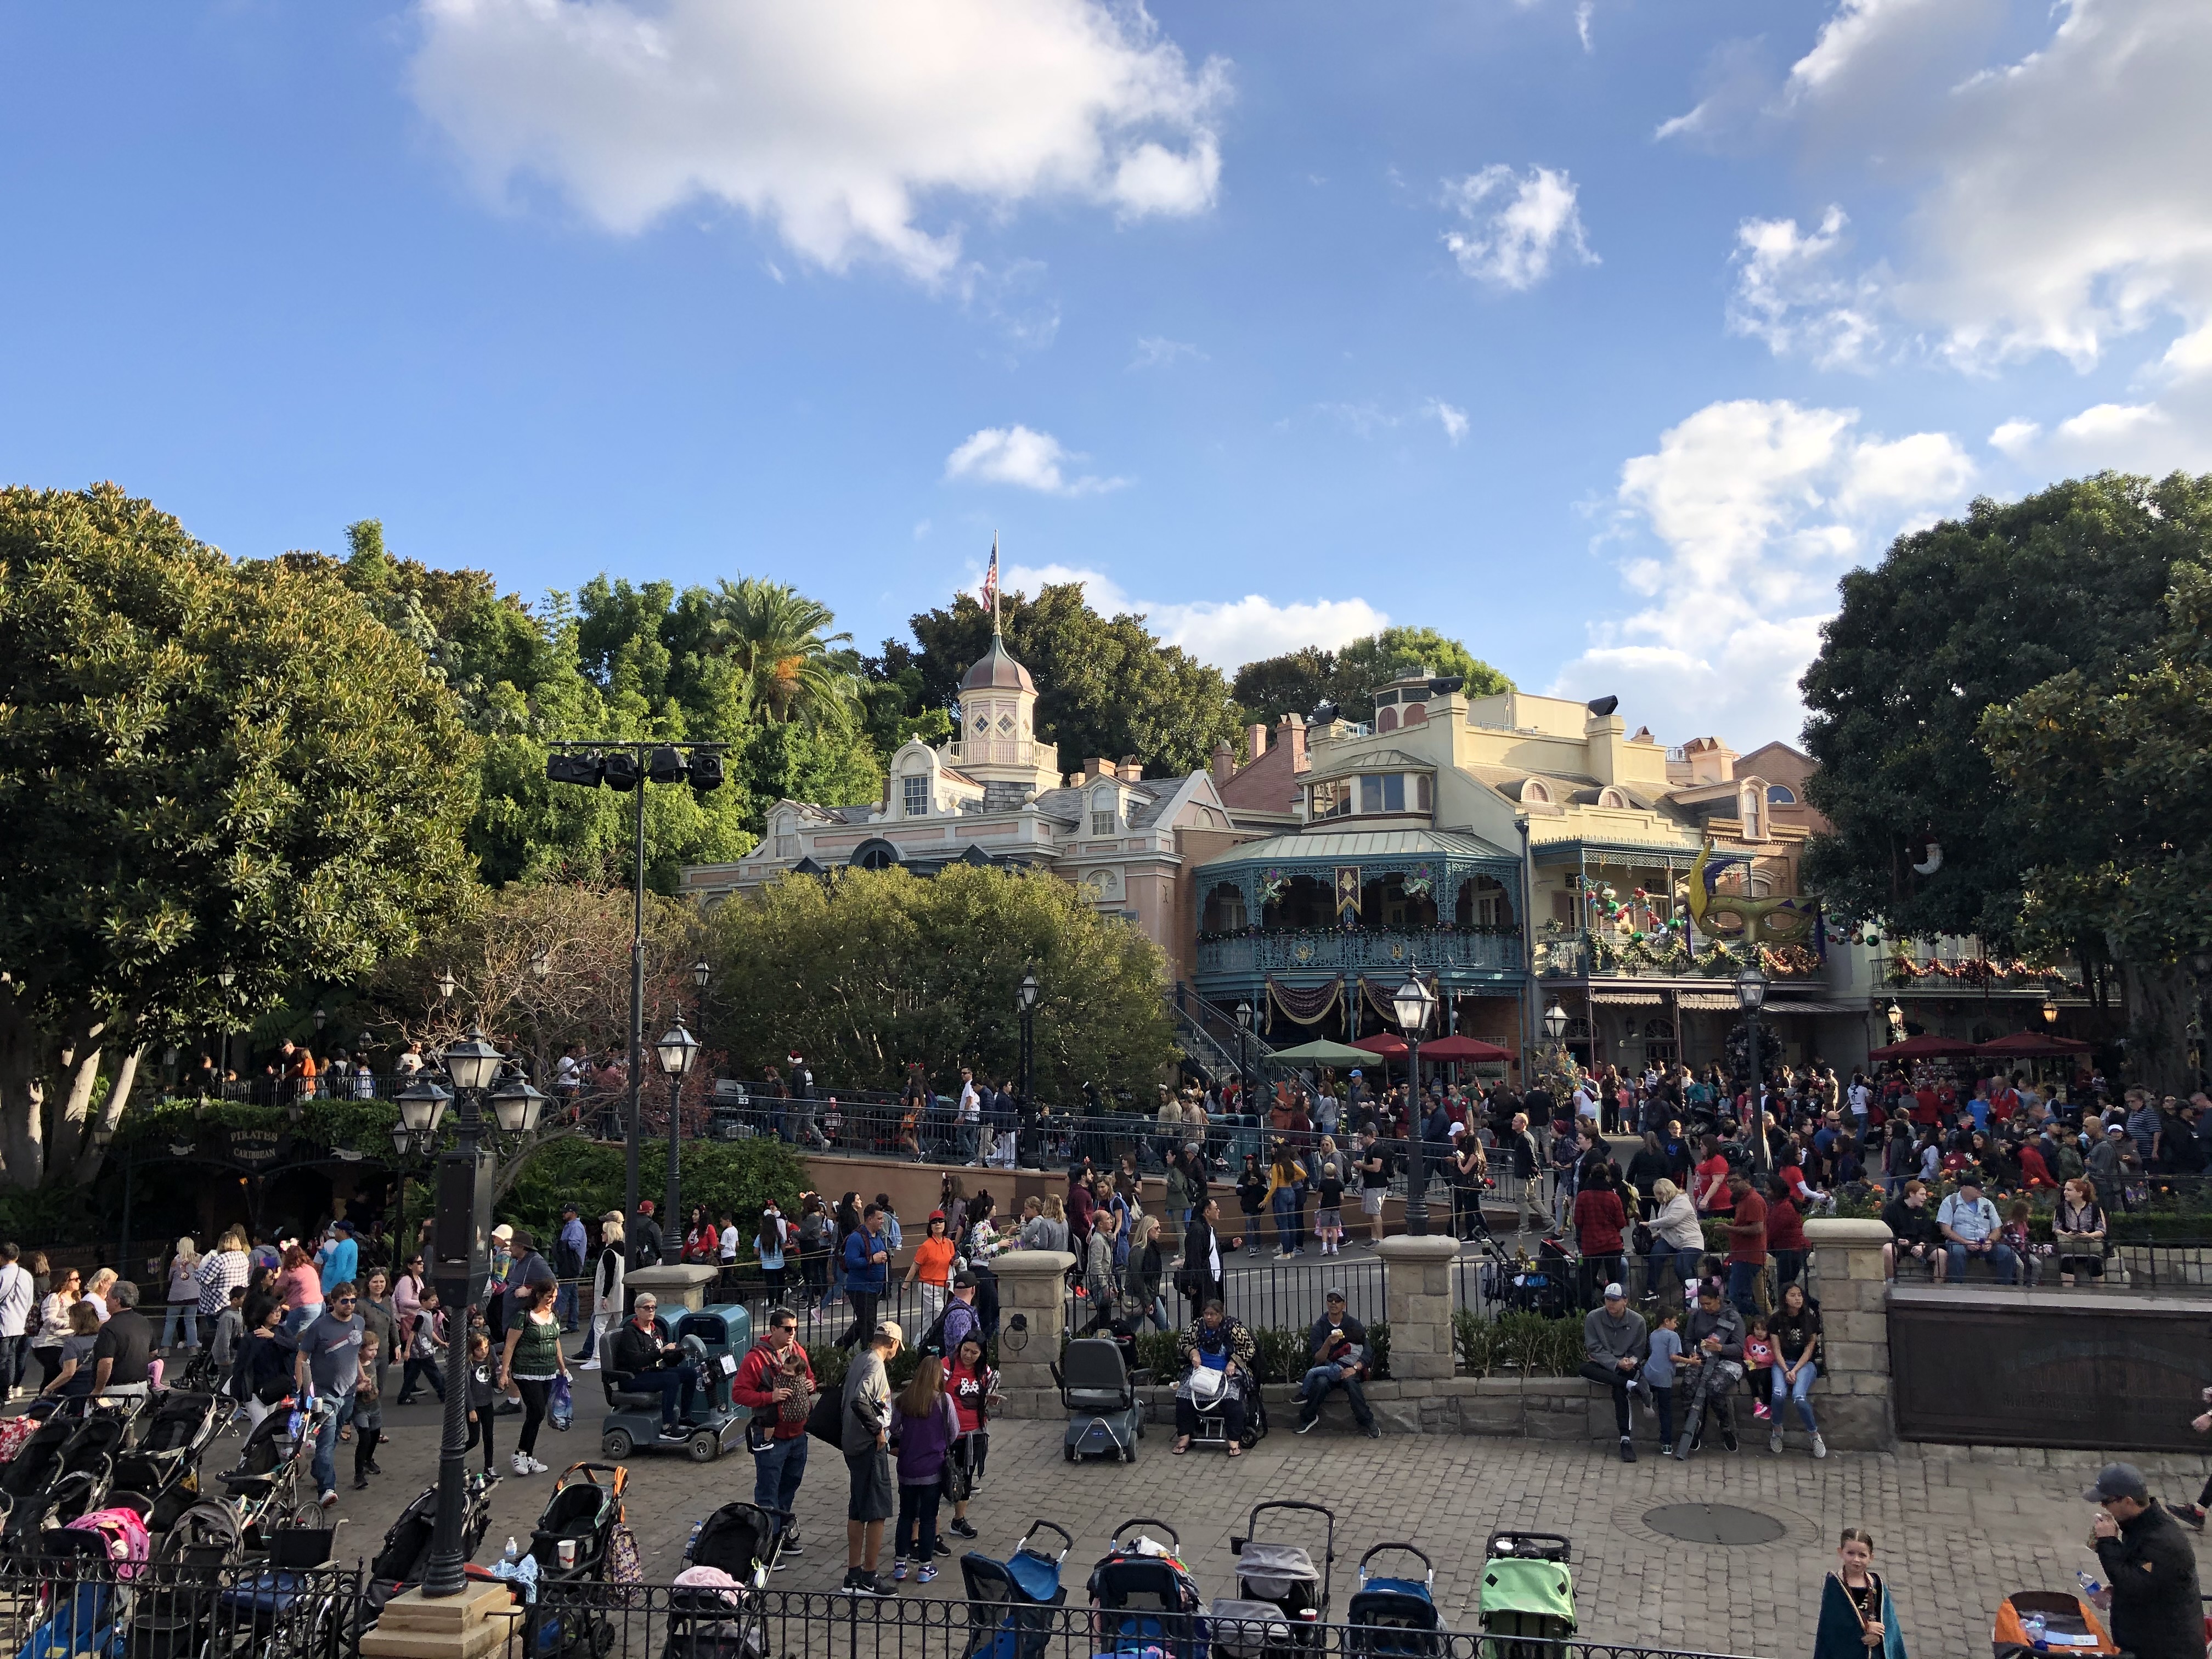 New orleans square dl